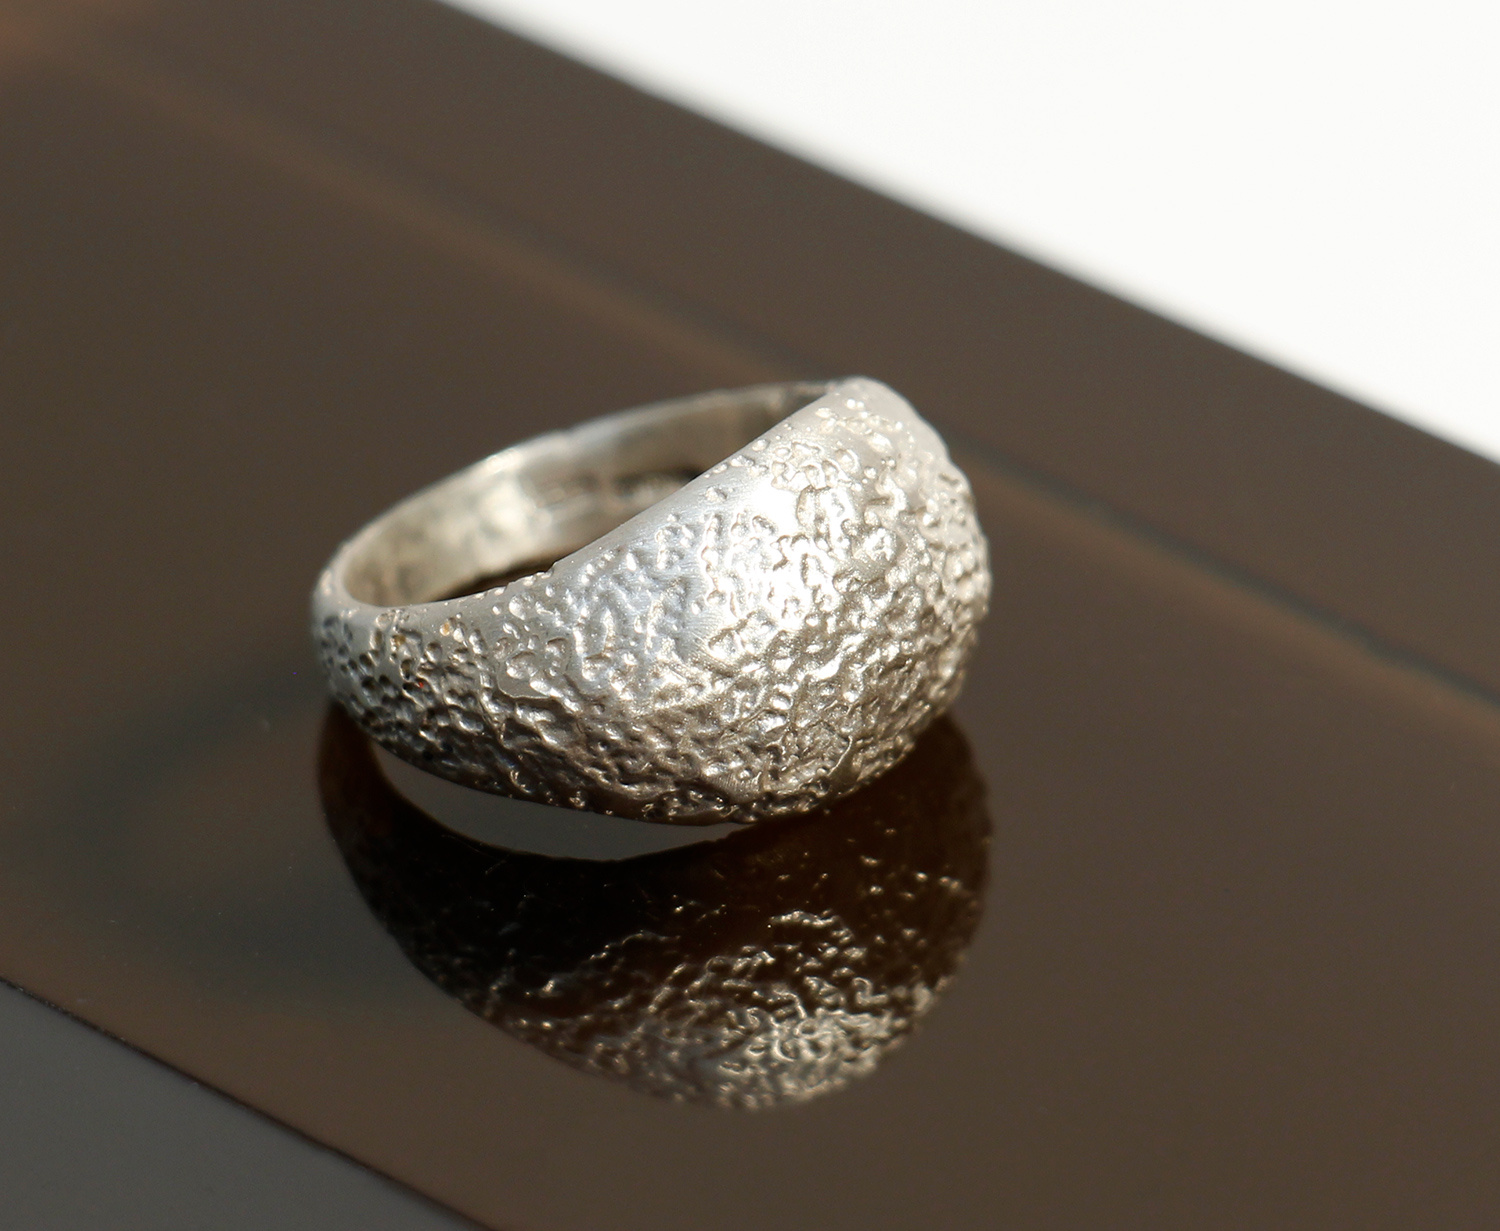 Bombe Ring by Susi Hines